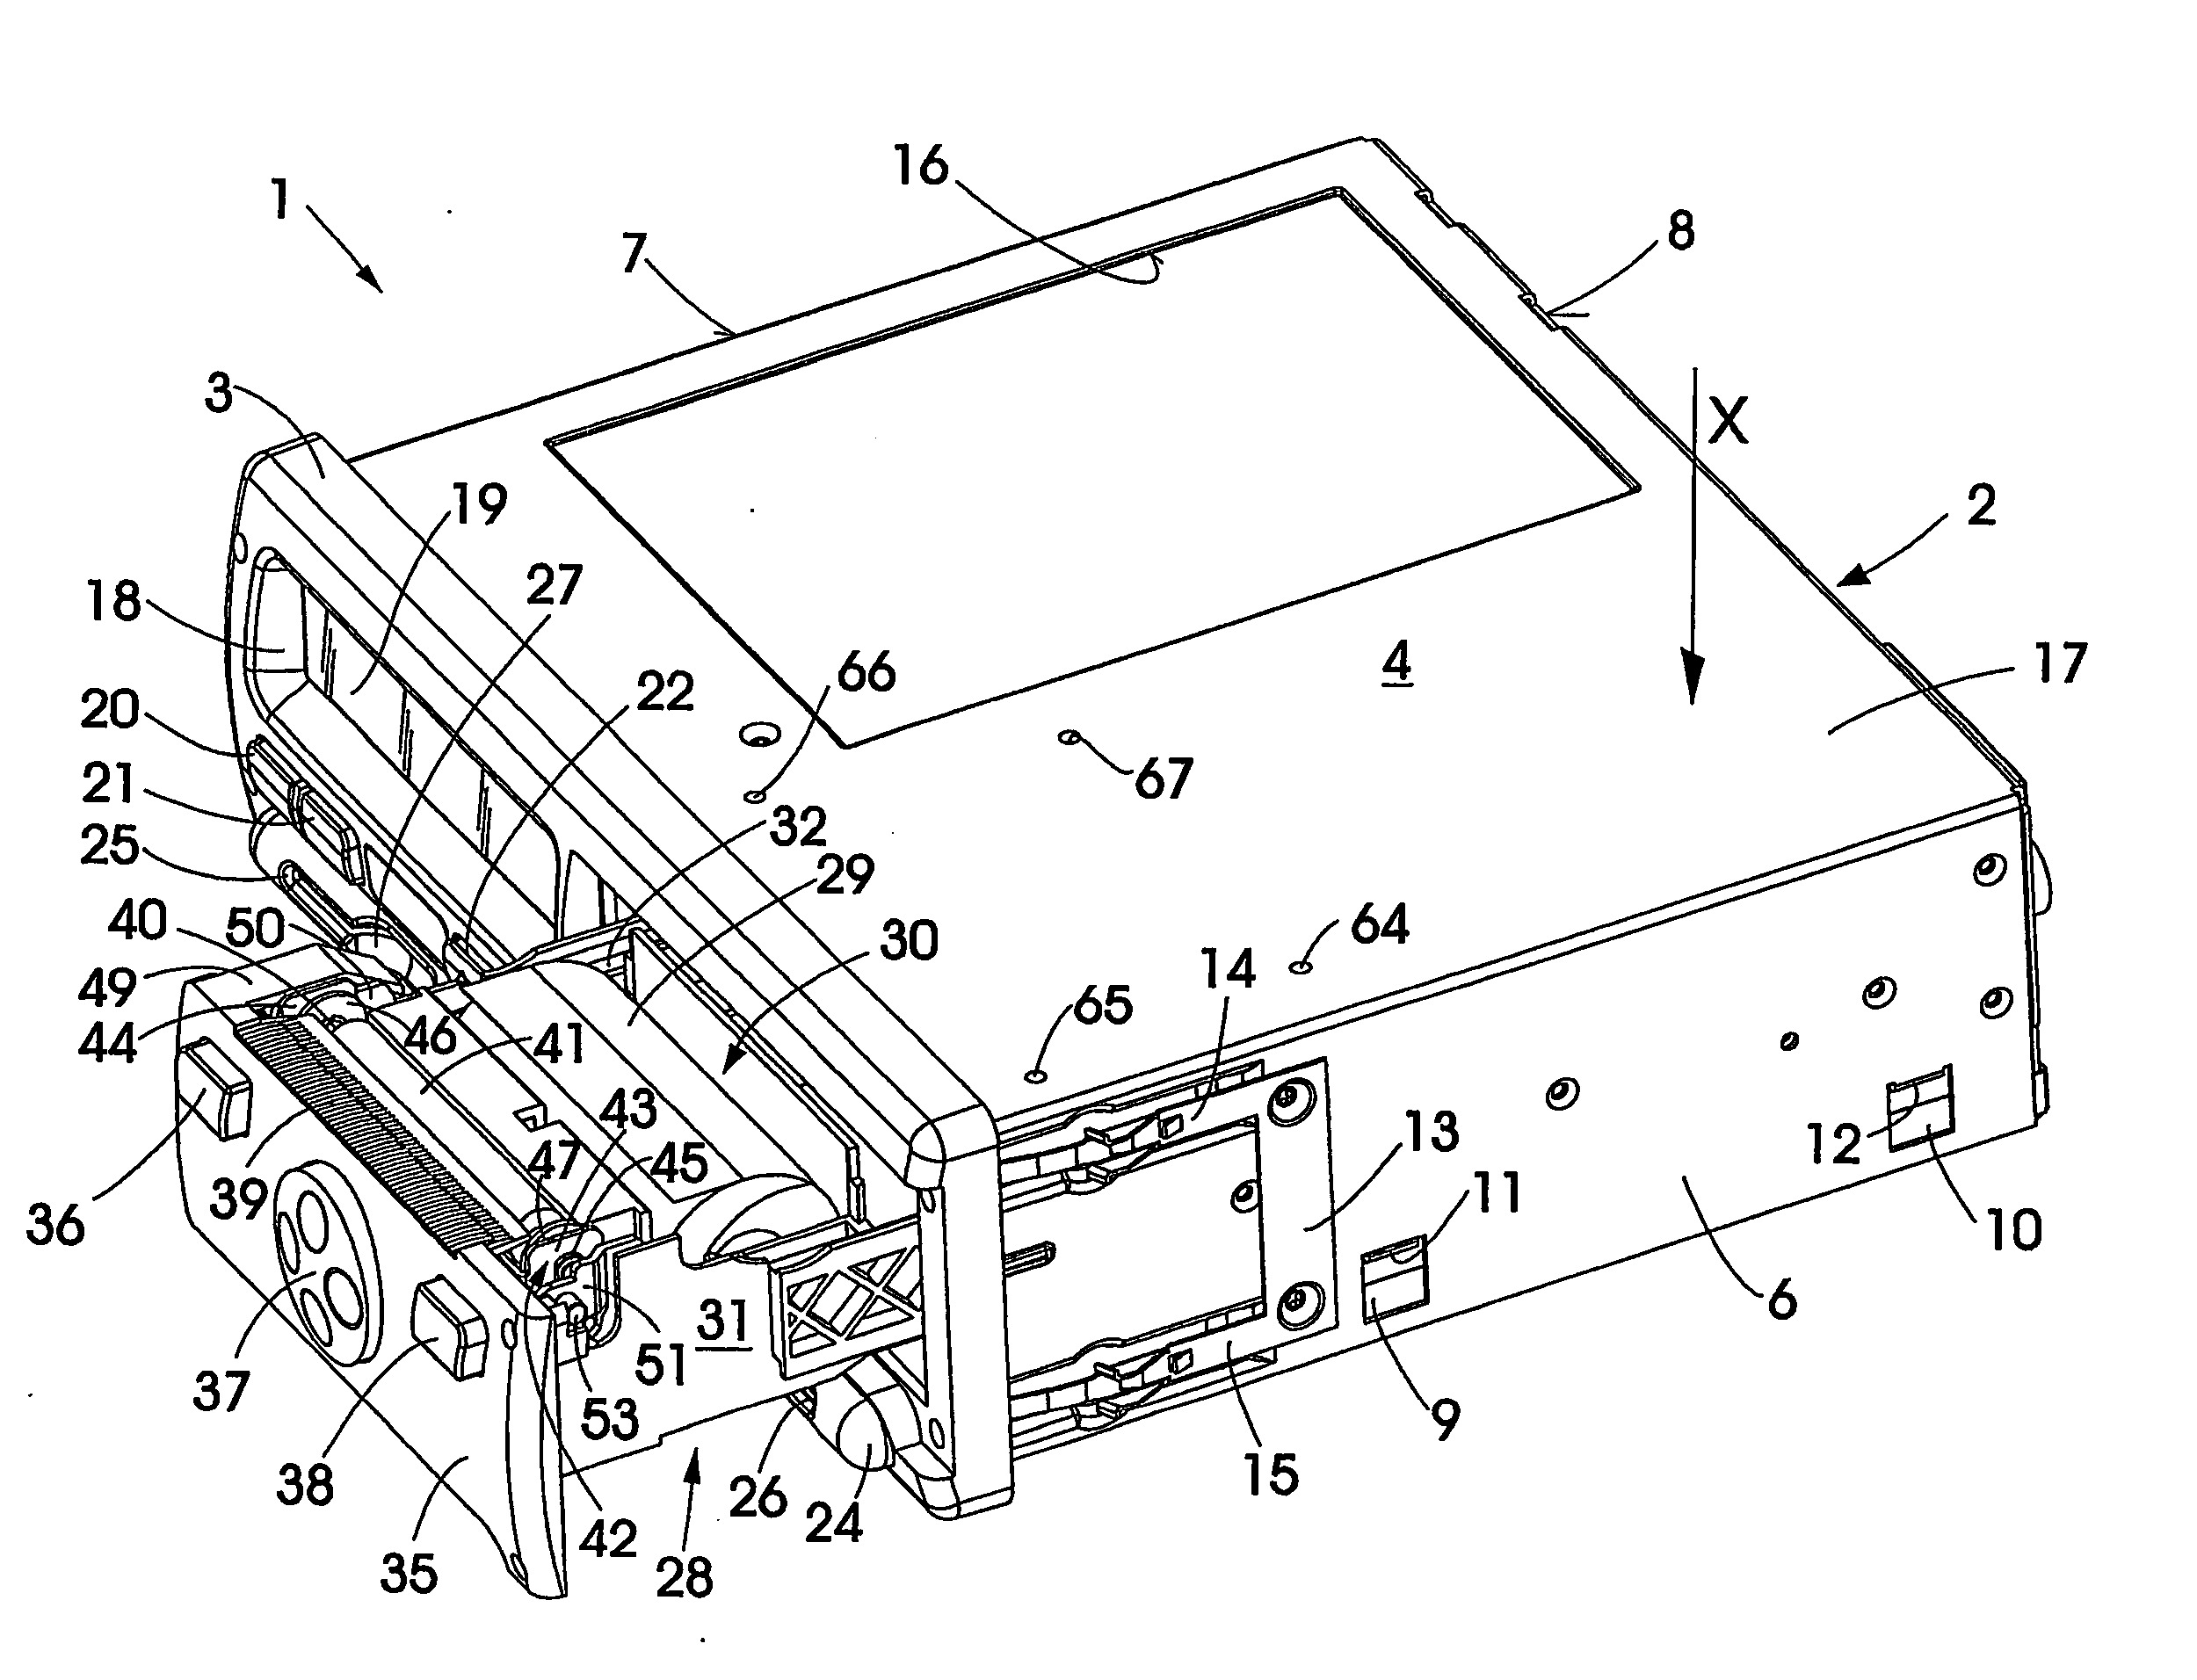 Tachograph with cubic housing and printing device